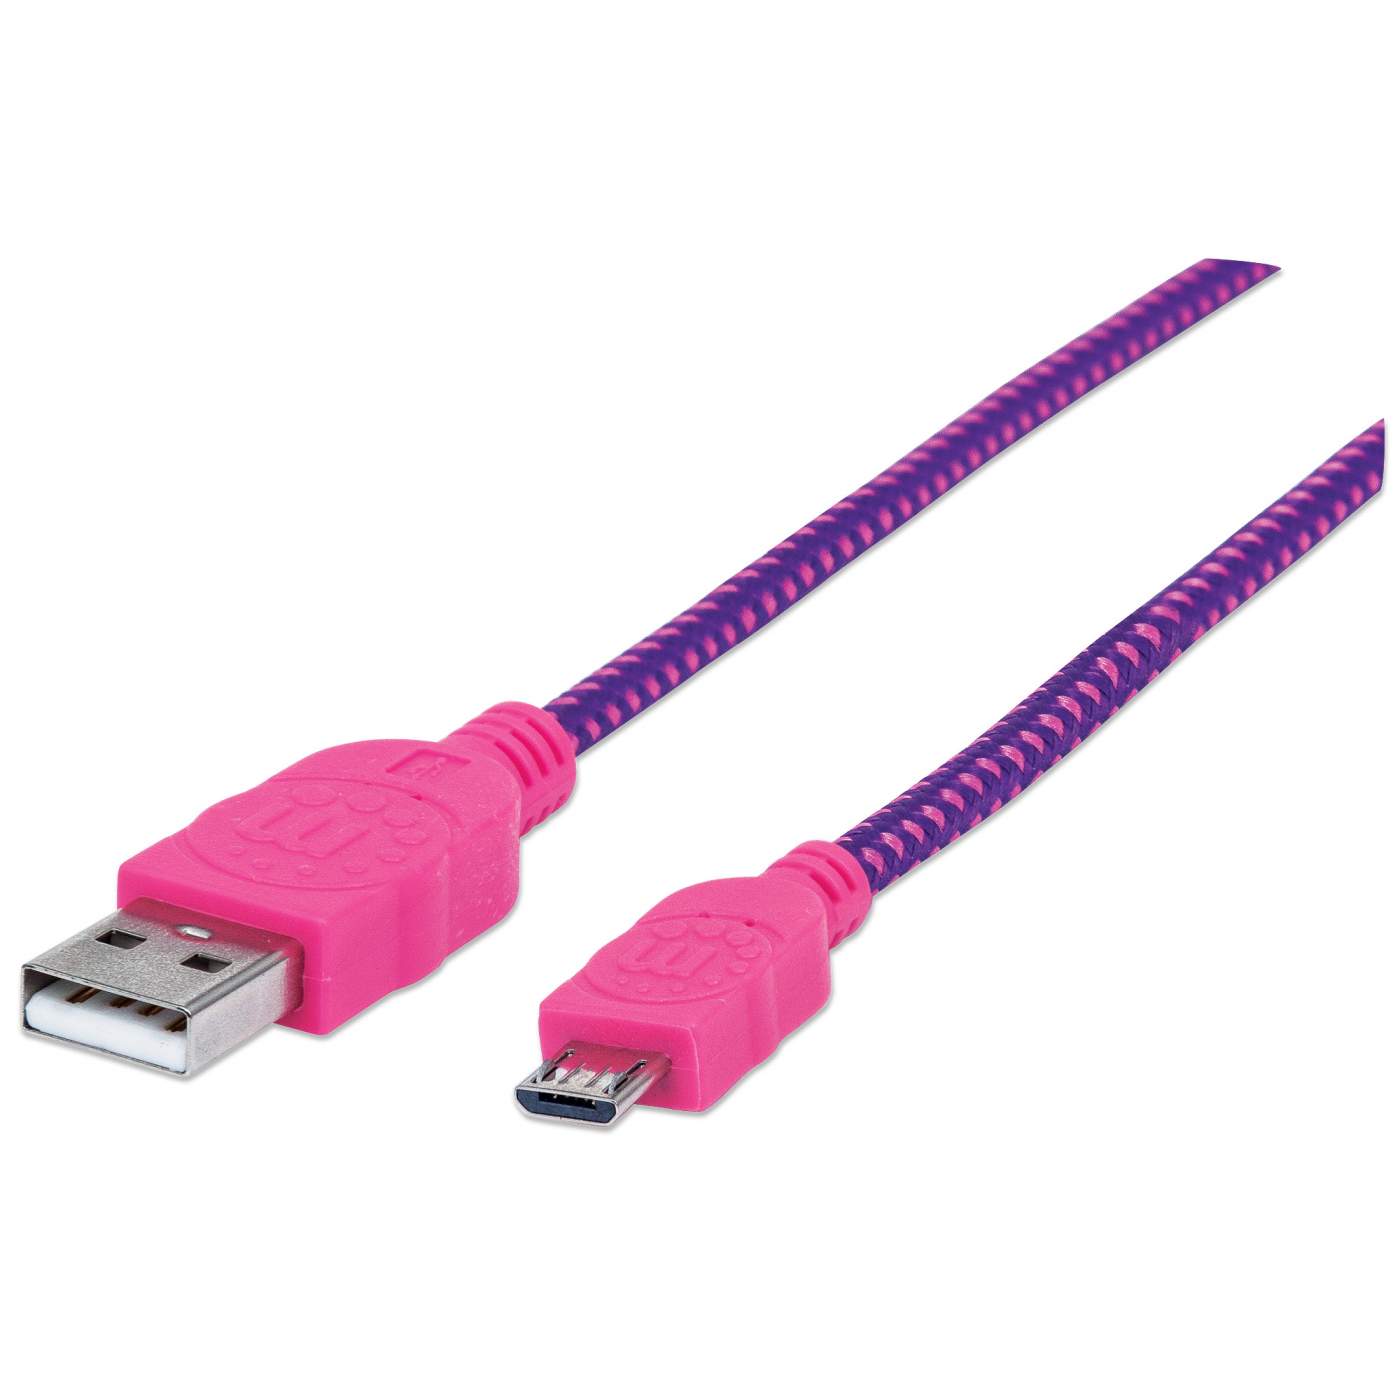 Braided Hi-Speed USB Micro-B Device Cable Image 1